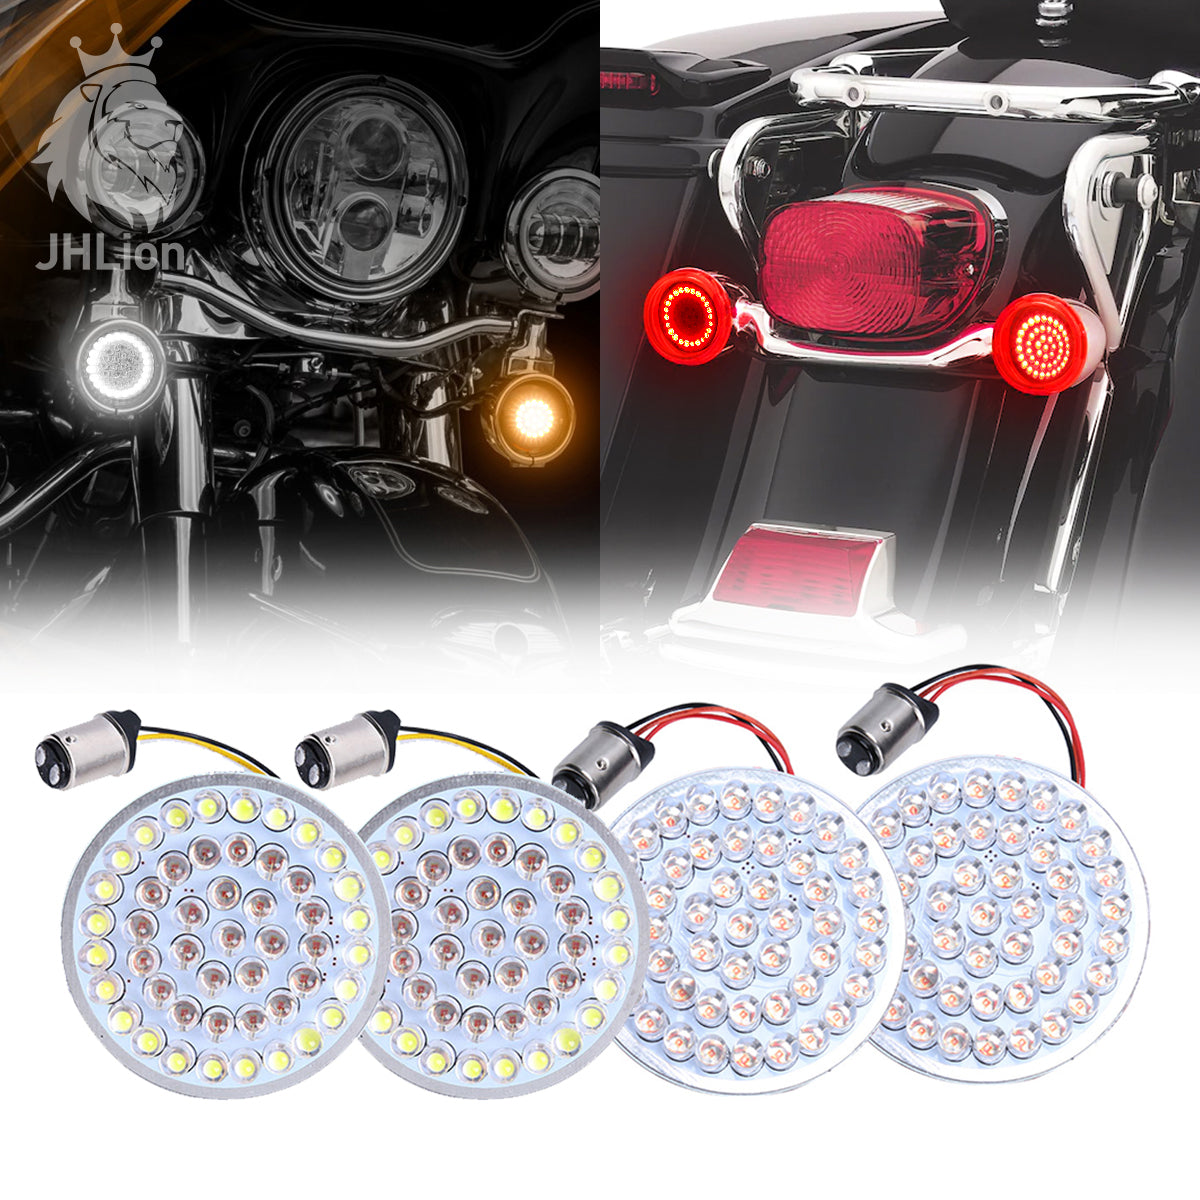 MZS 2 1157 Turn Signal LED Bulb Running Light Kit Bullet Style w/Dual Color Front or Rear Compatible Motorcycles Harley Davidson 48White + 48Amber 